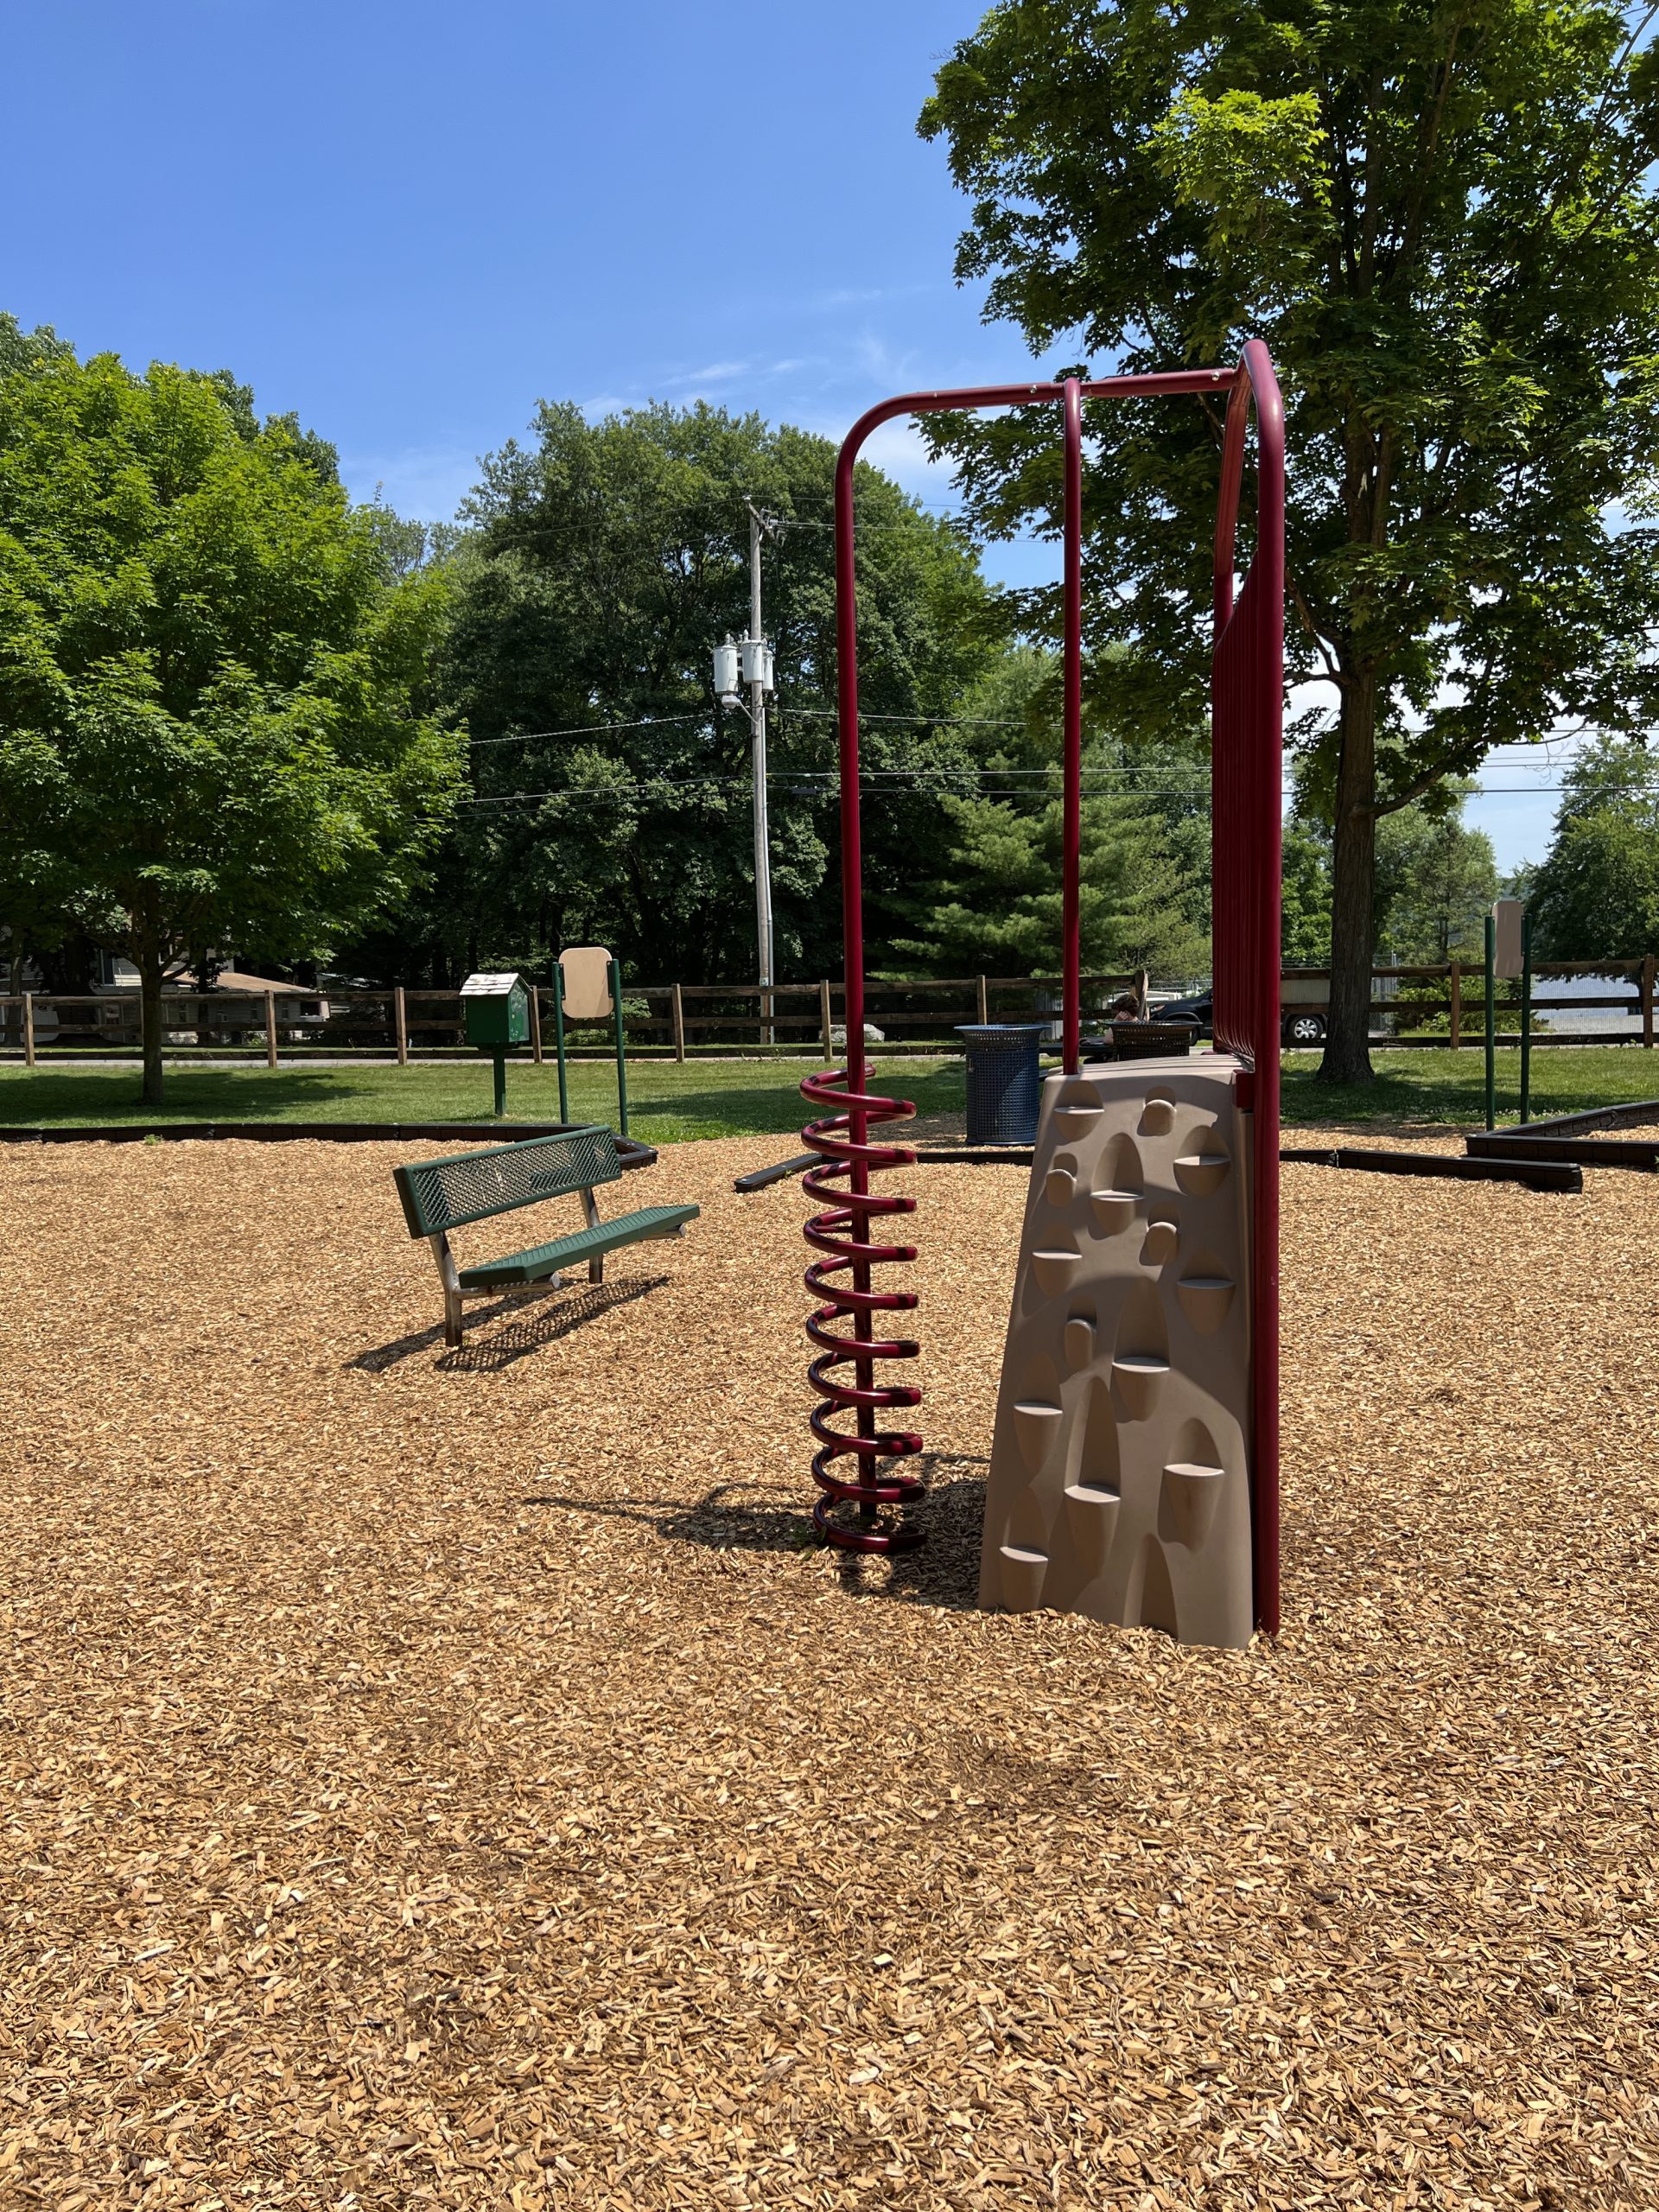 Lake Musconetcong Park Playground in Stanhope NJ - Features - Stand alone twisting ladder